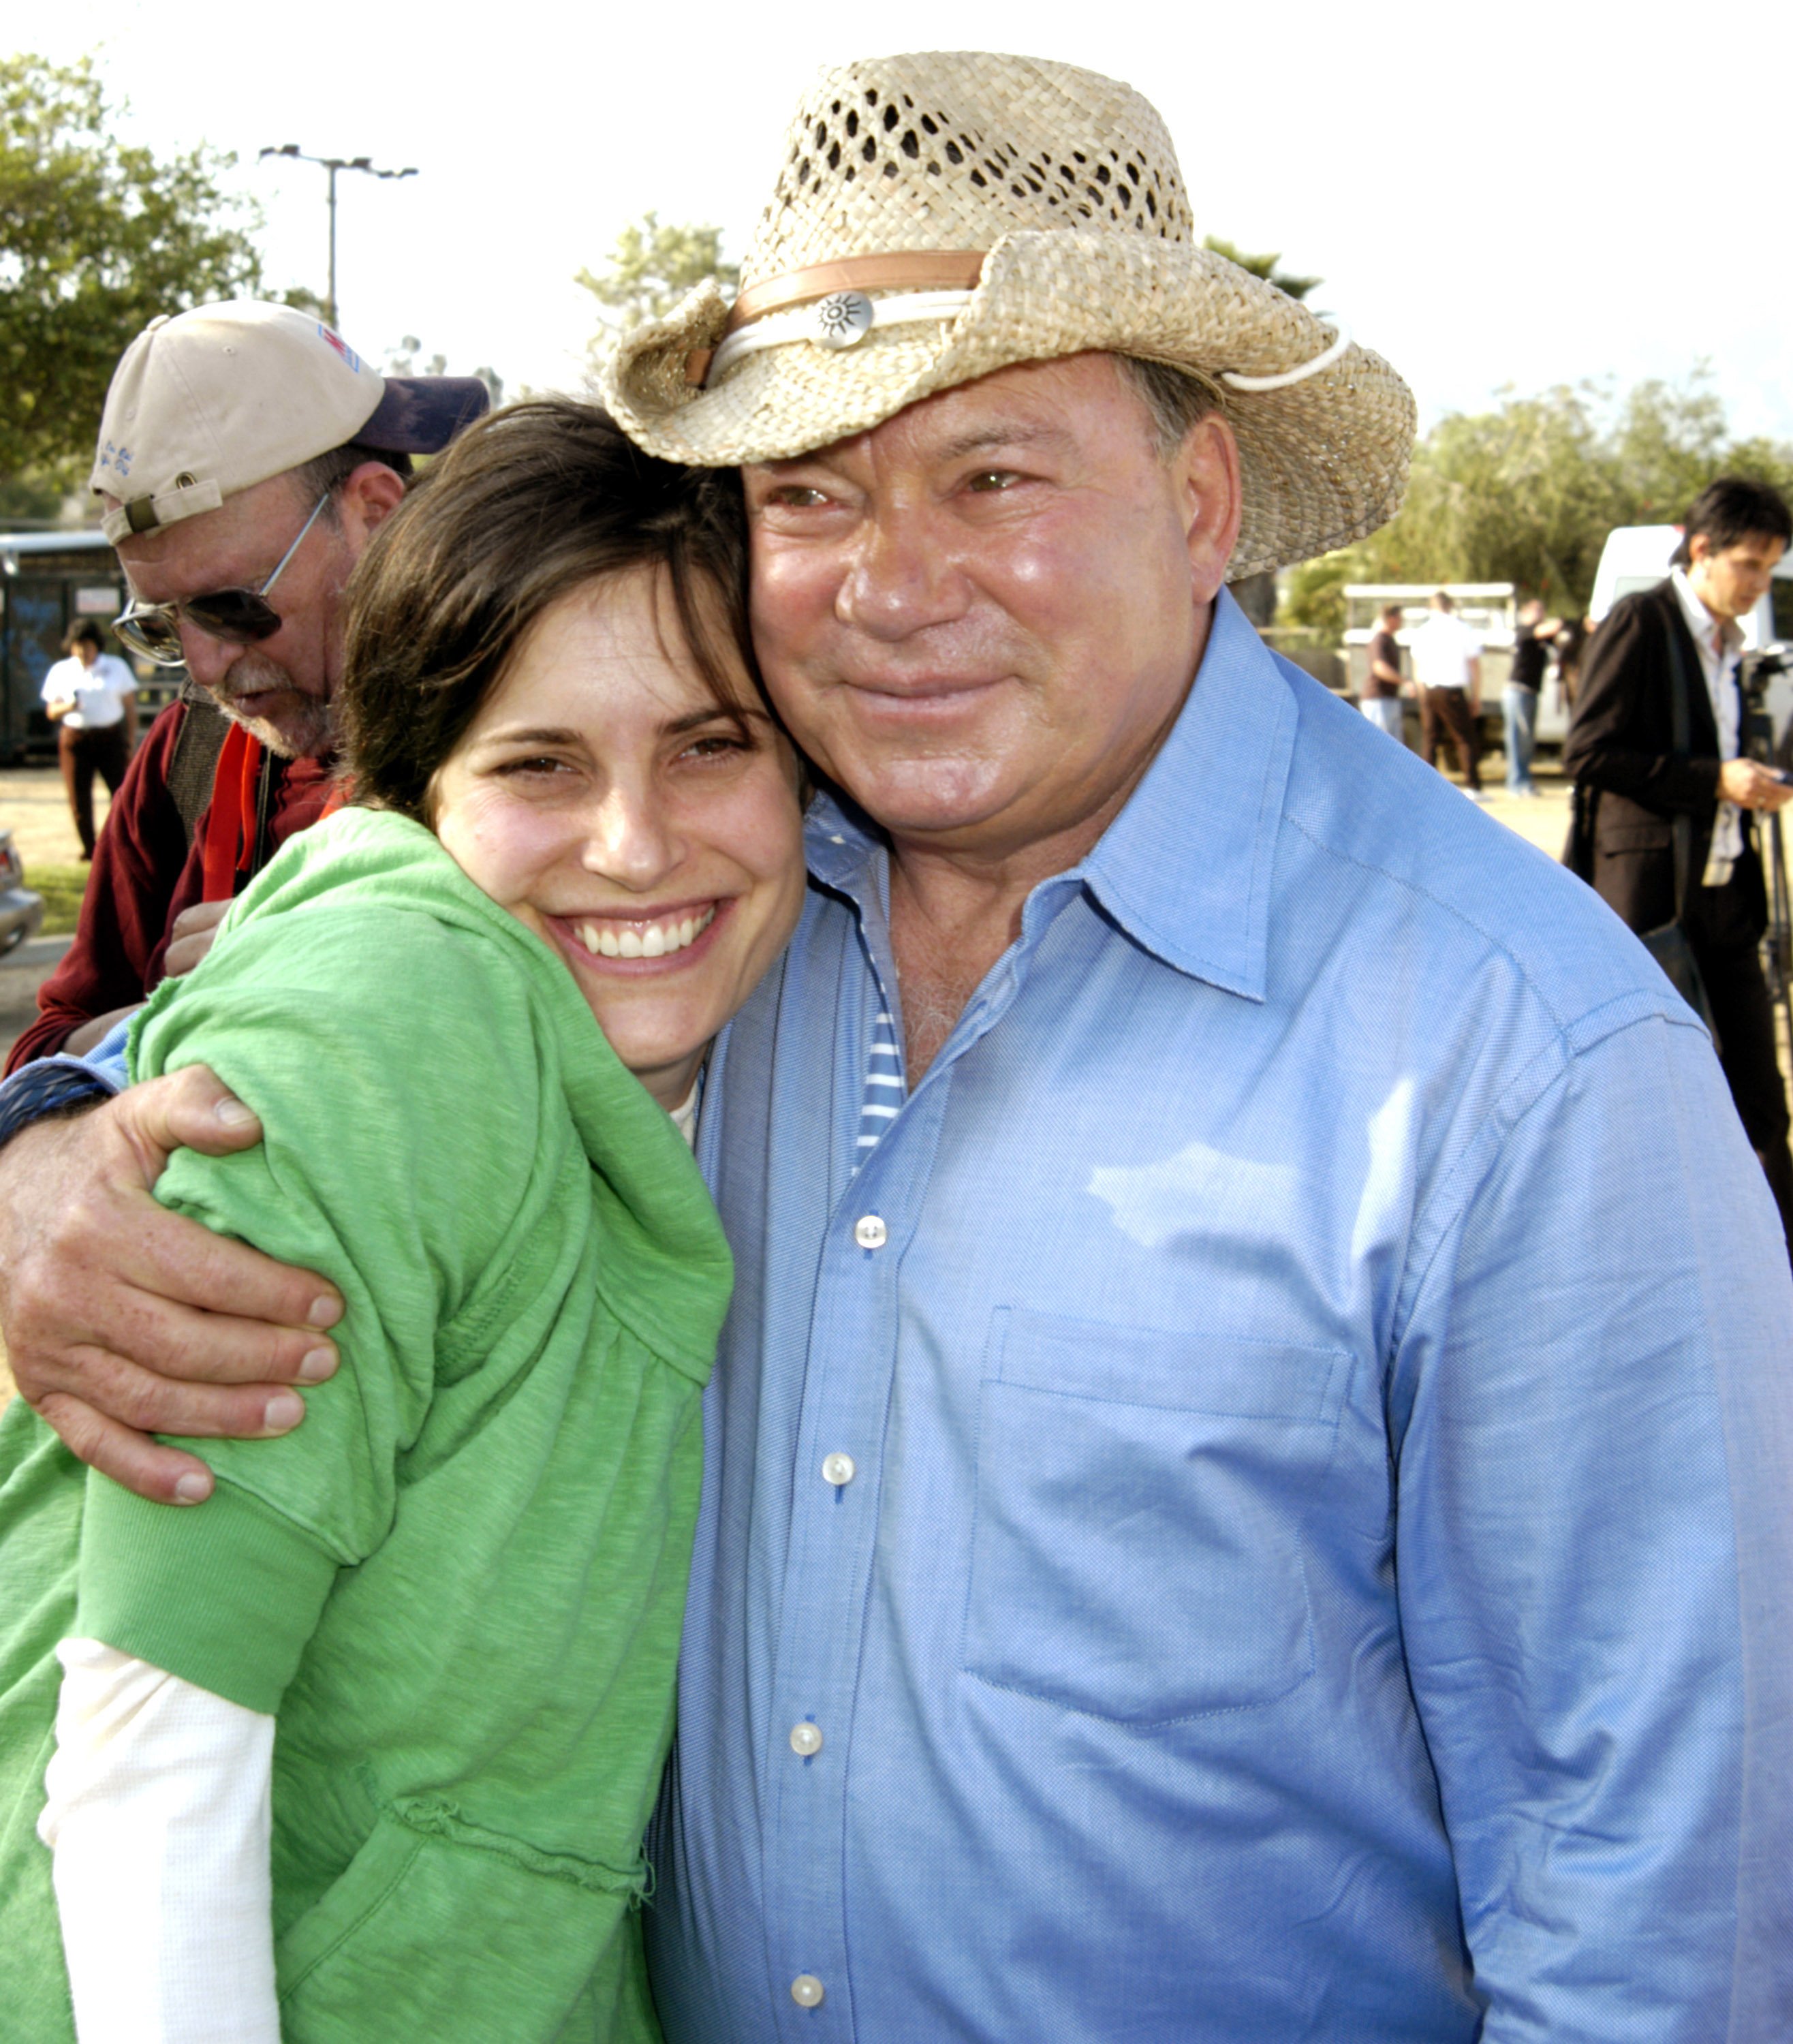 Melanie Shatner and William Shatner at the William Shatner Wells Fargo Hollywood Charity Horse Show on April 29, 2006, in California | Source: Getty Images